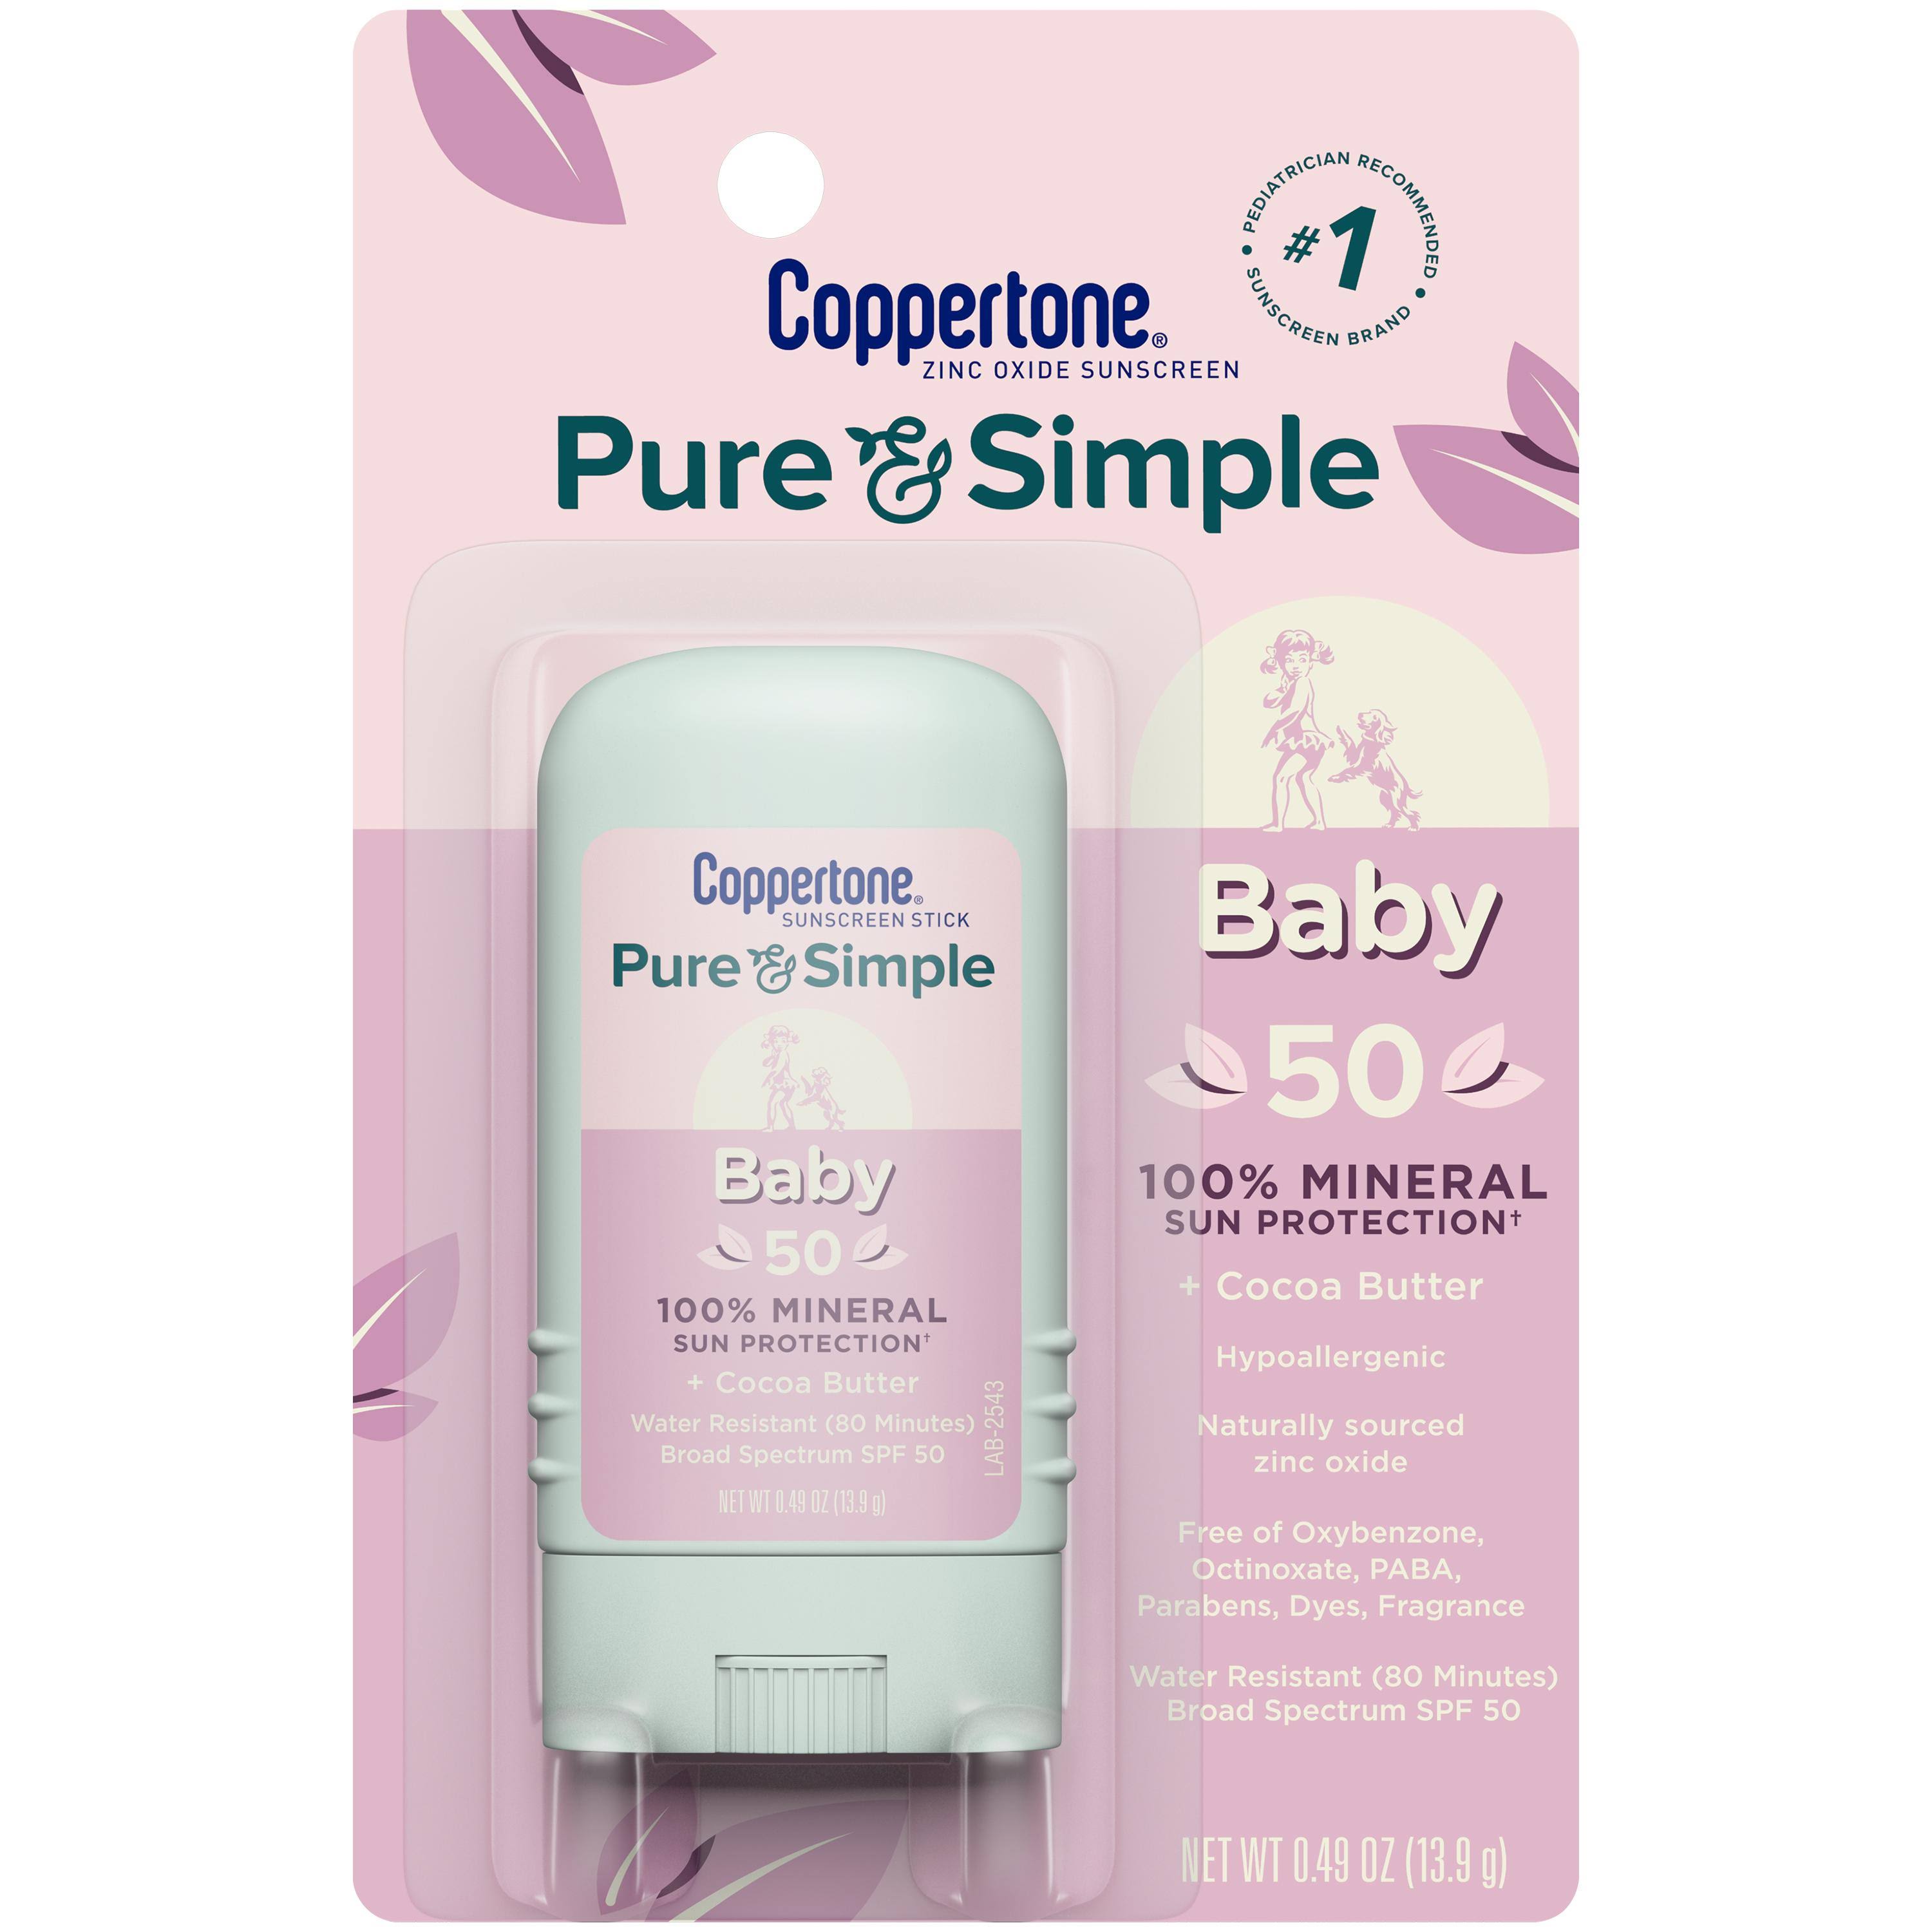 Coppertone Pure and Simple Baby Sunscreen Stick - SPF 50 - 0.49oz